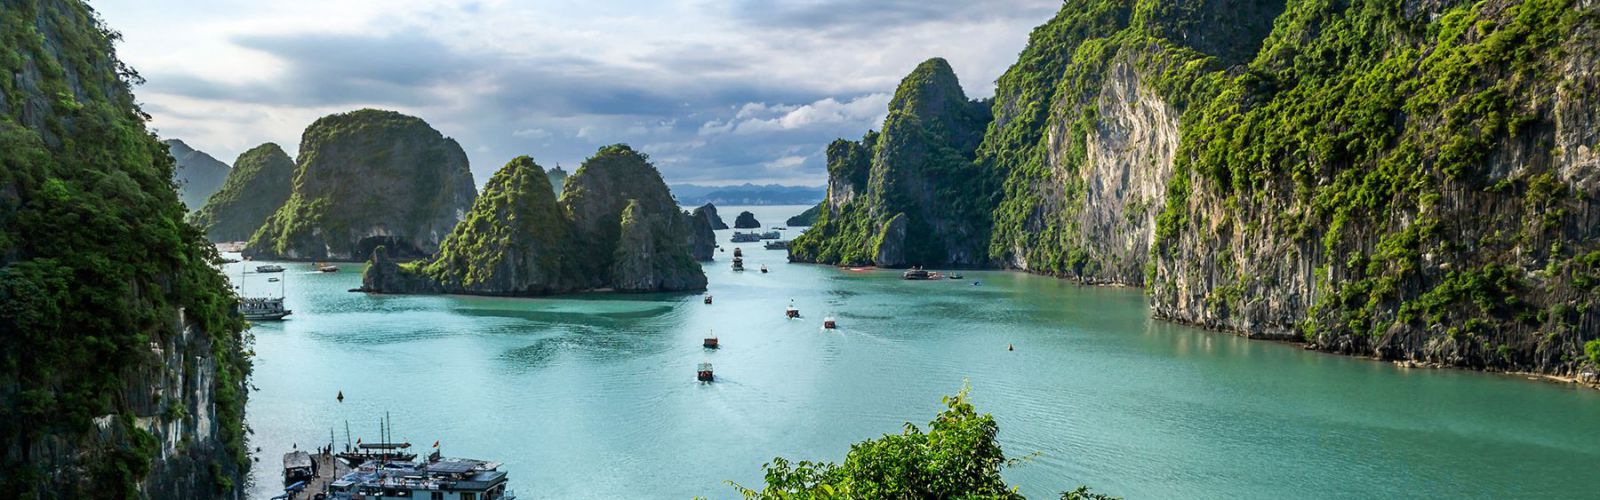 South to North Vietnam Tours